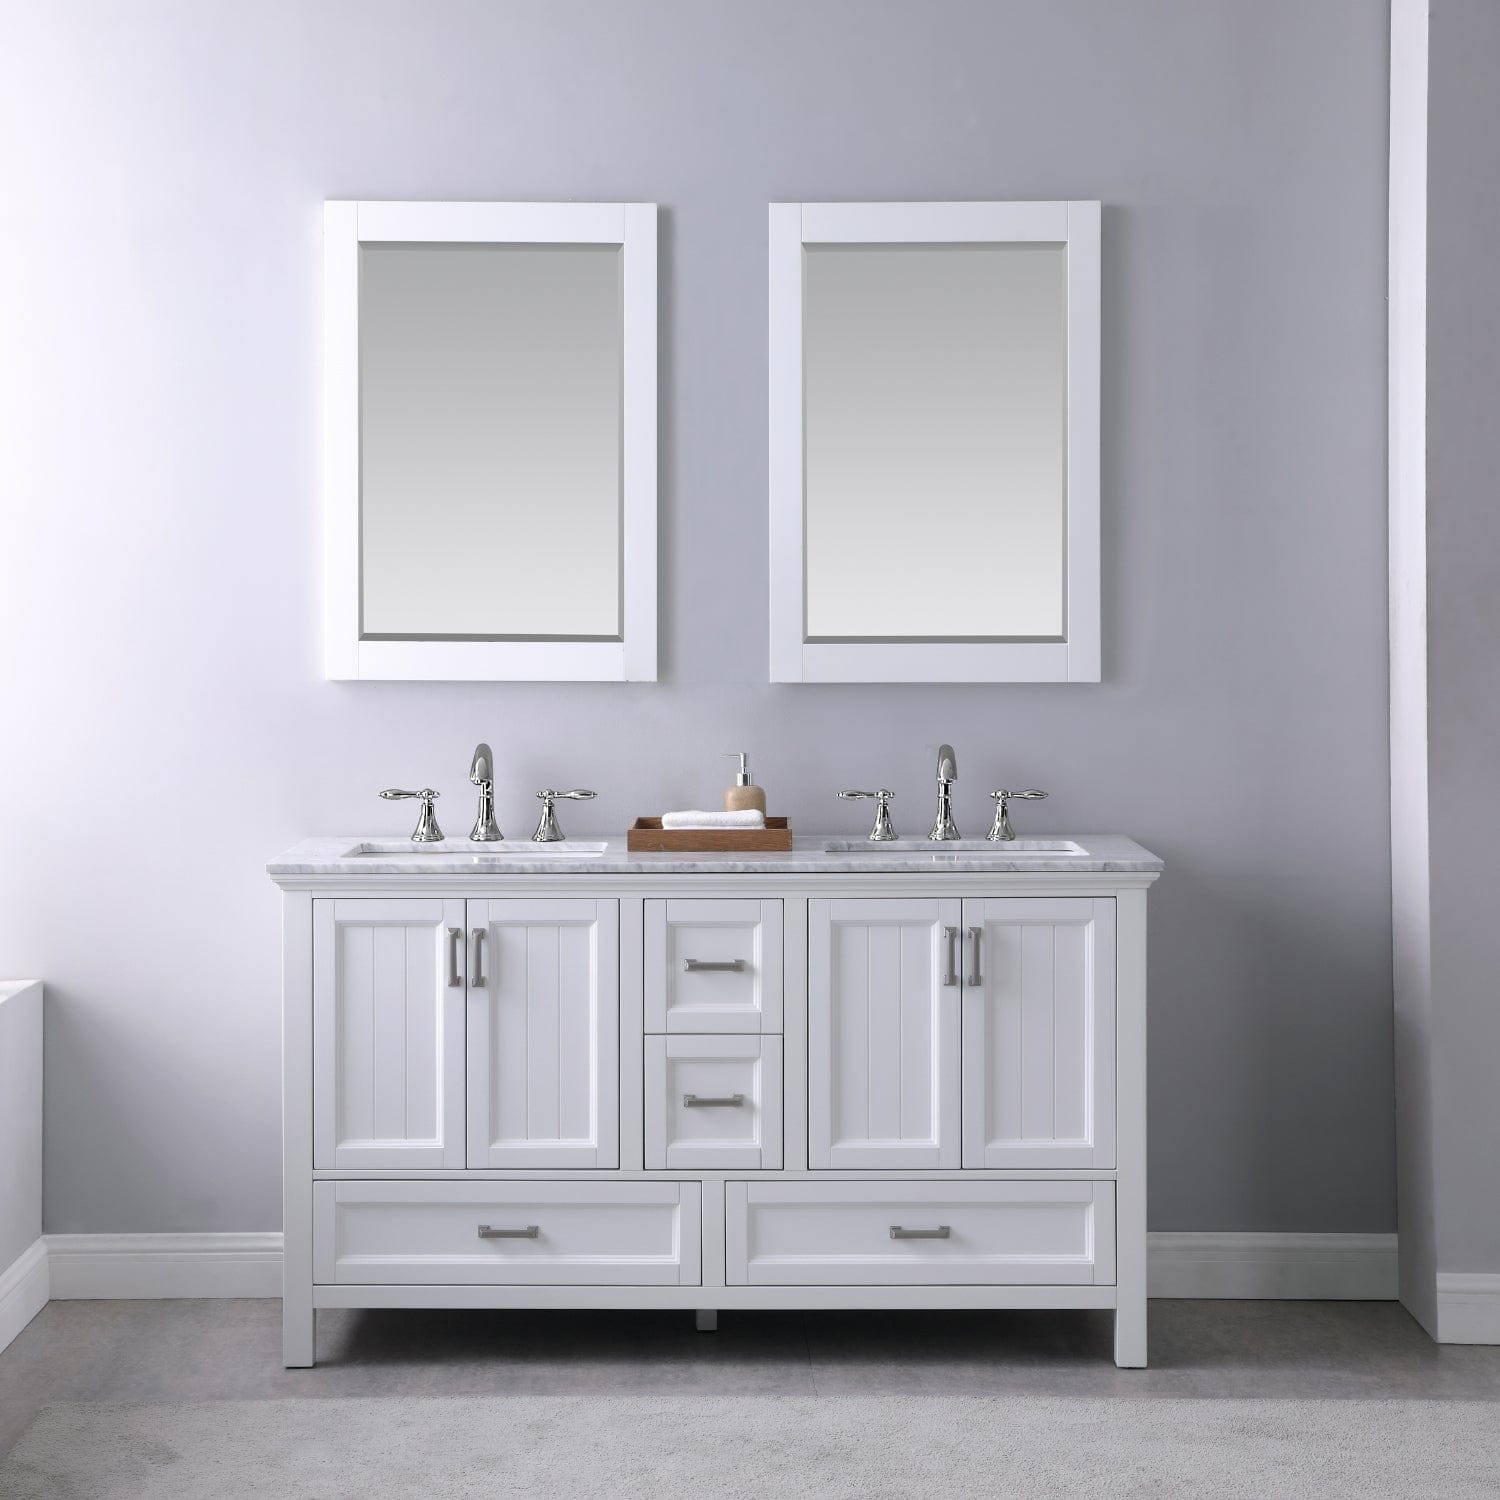 Altair Isla 60" Double Bathroom Vanity Set in White and Carrara White Marble Countertop with Mirror 538060-WH-CA - Molaix631112970938Vanity538060-WH-CA